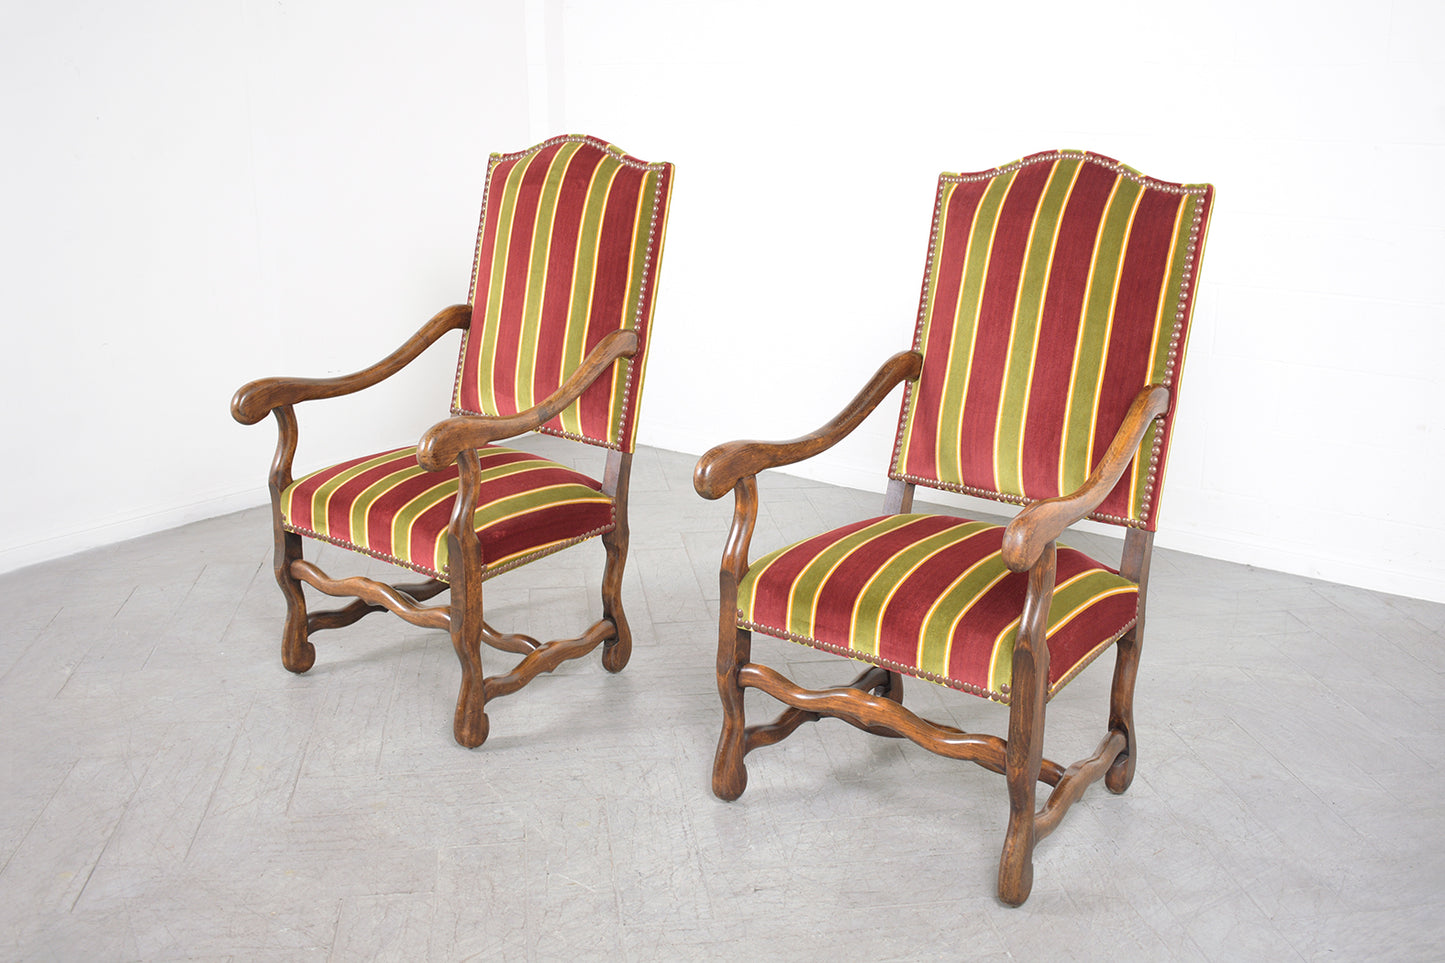 19th Century French Armchairs: Dark Walnut Finish with Striped Velvet Upholstery